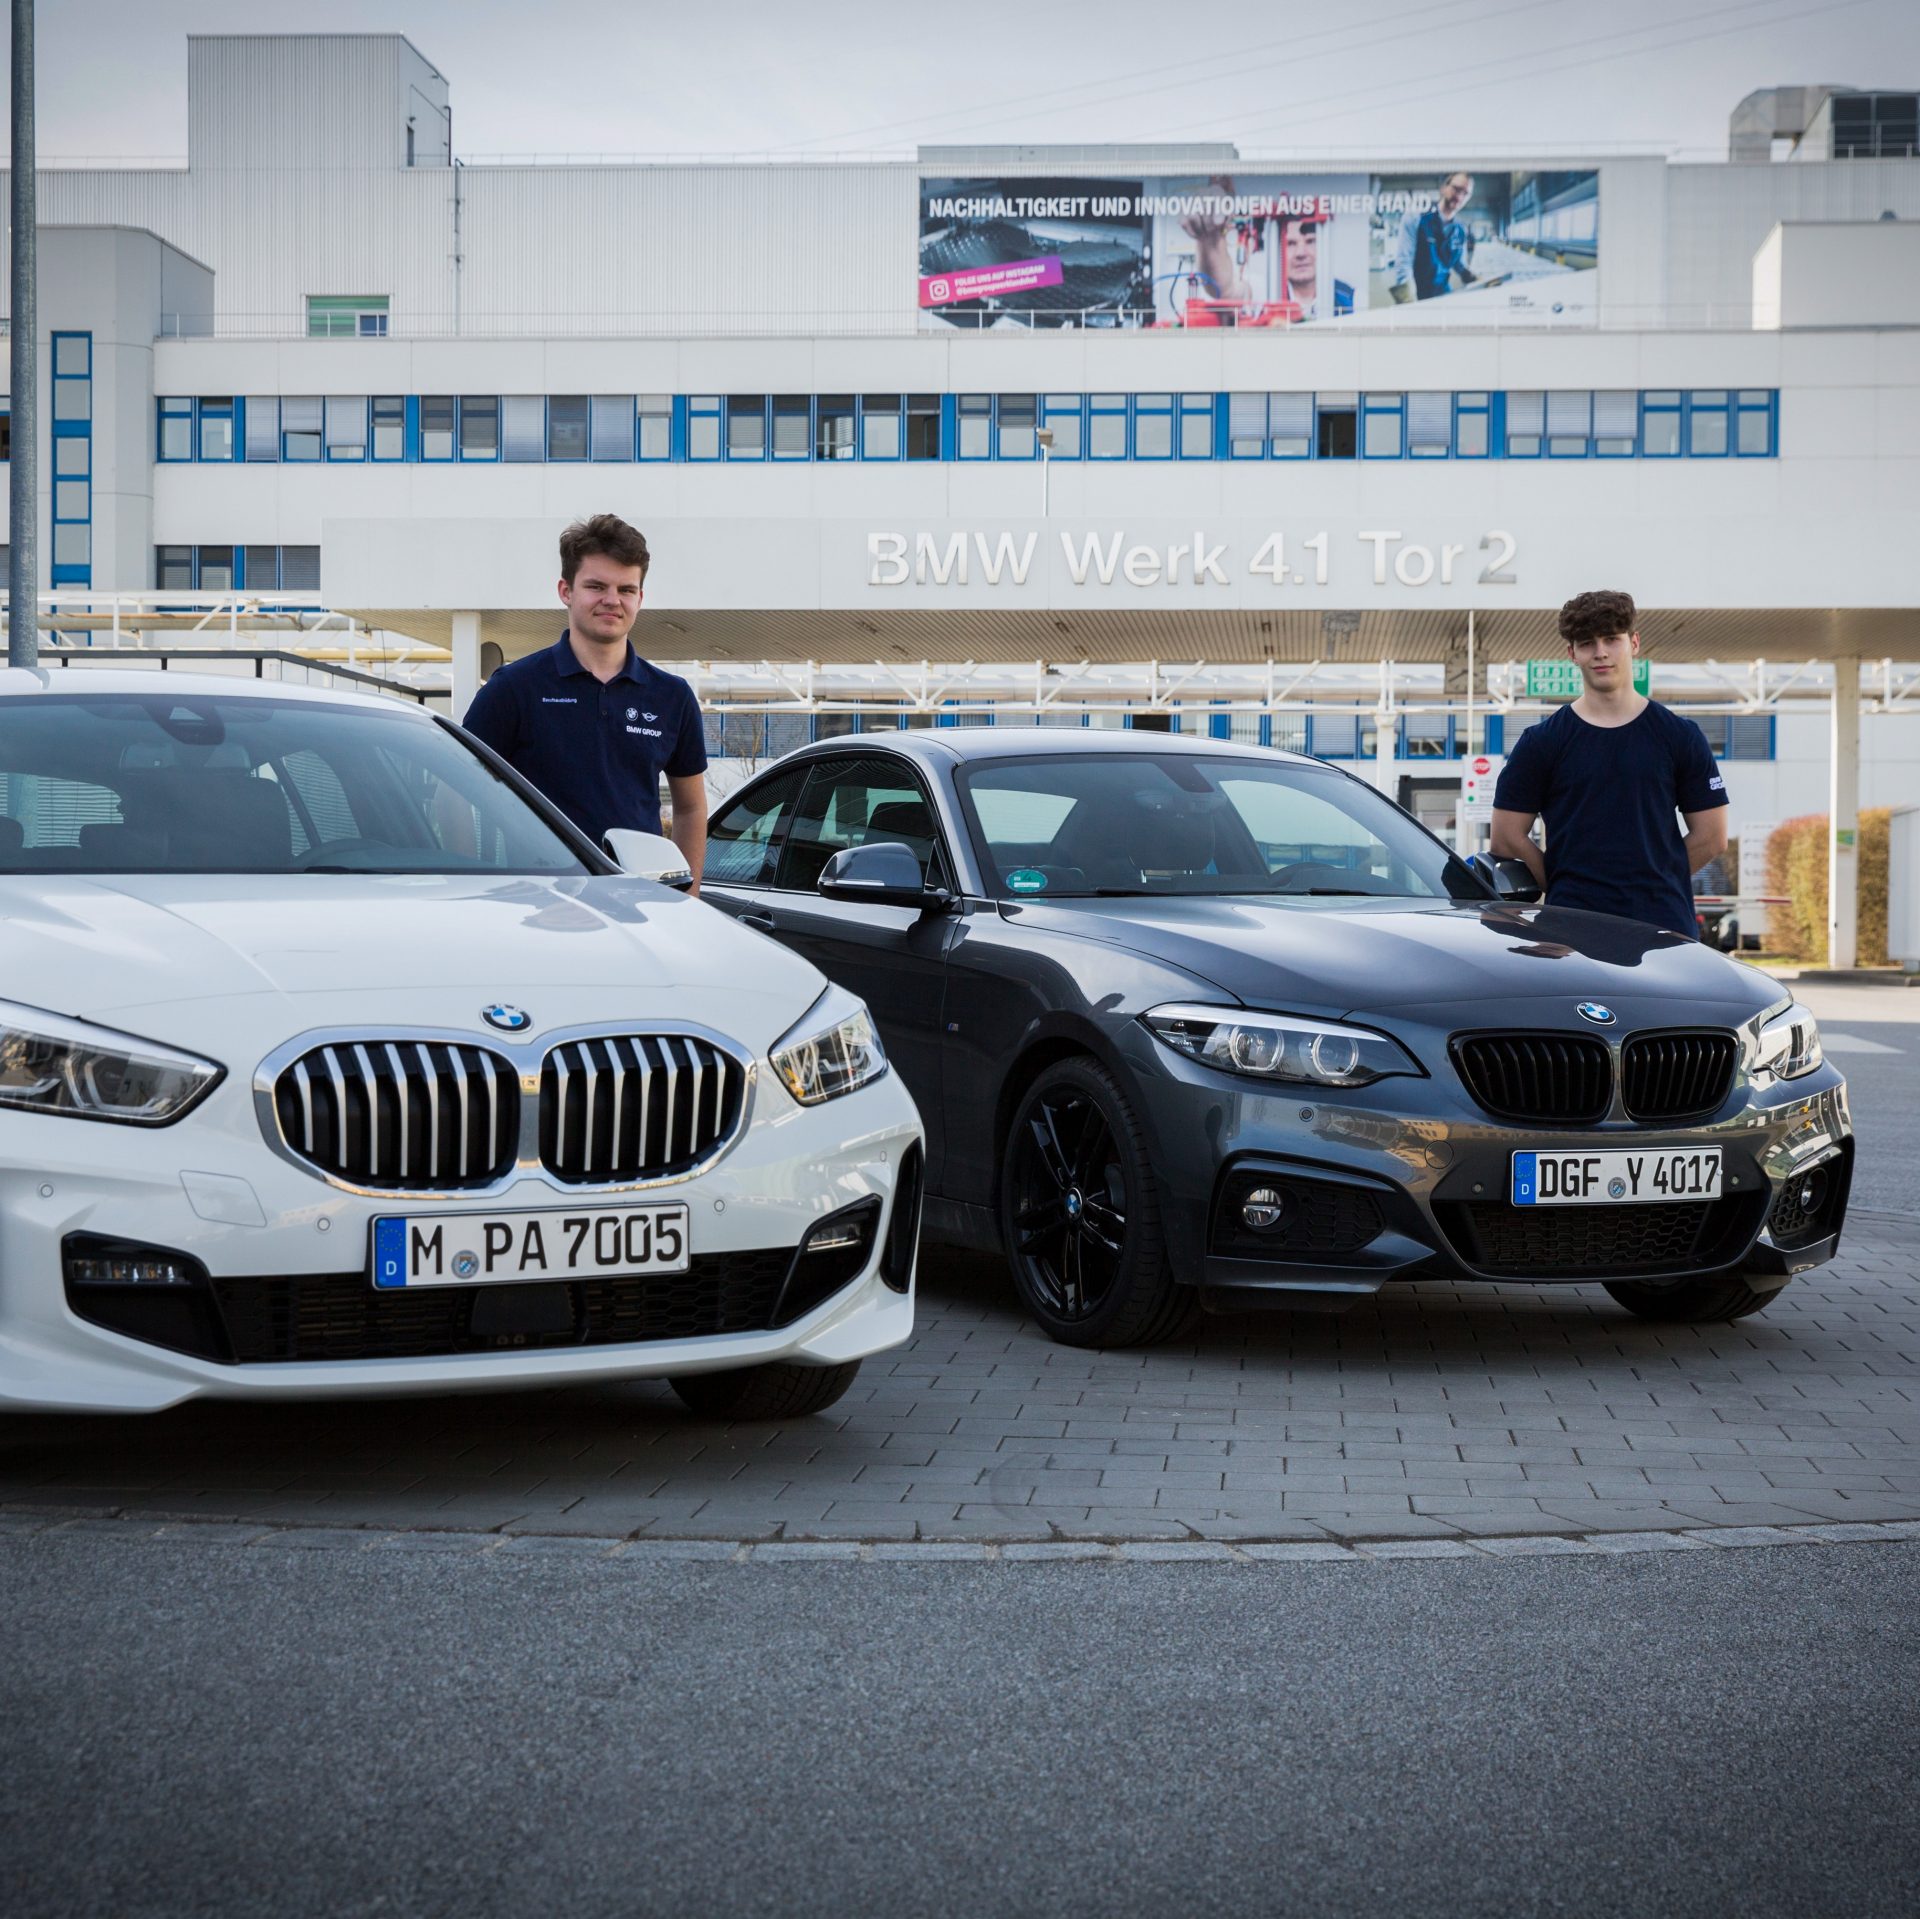 The picture shows two BMW apprentices who stand next to their car smiling.